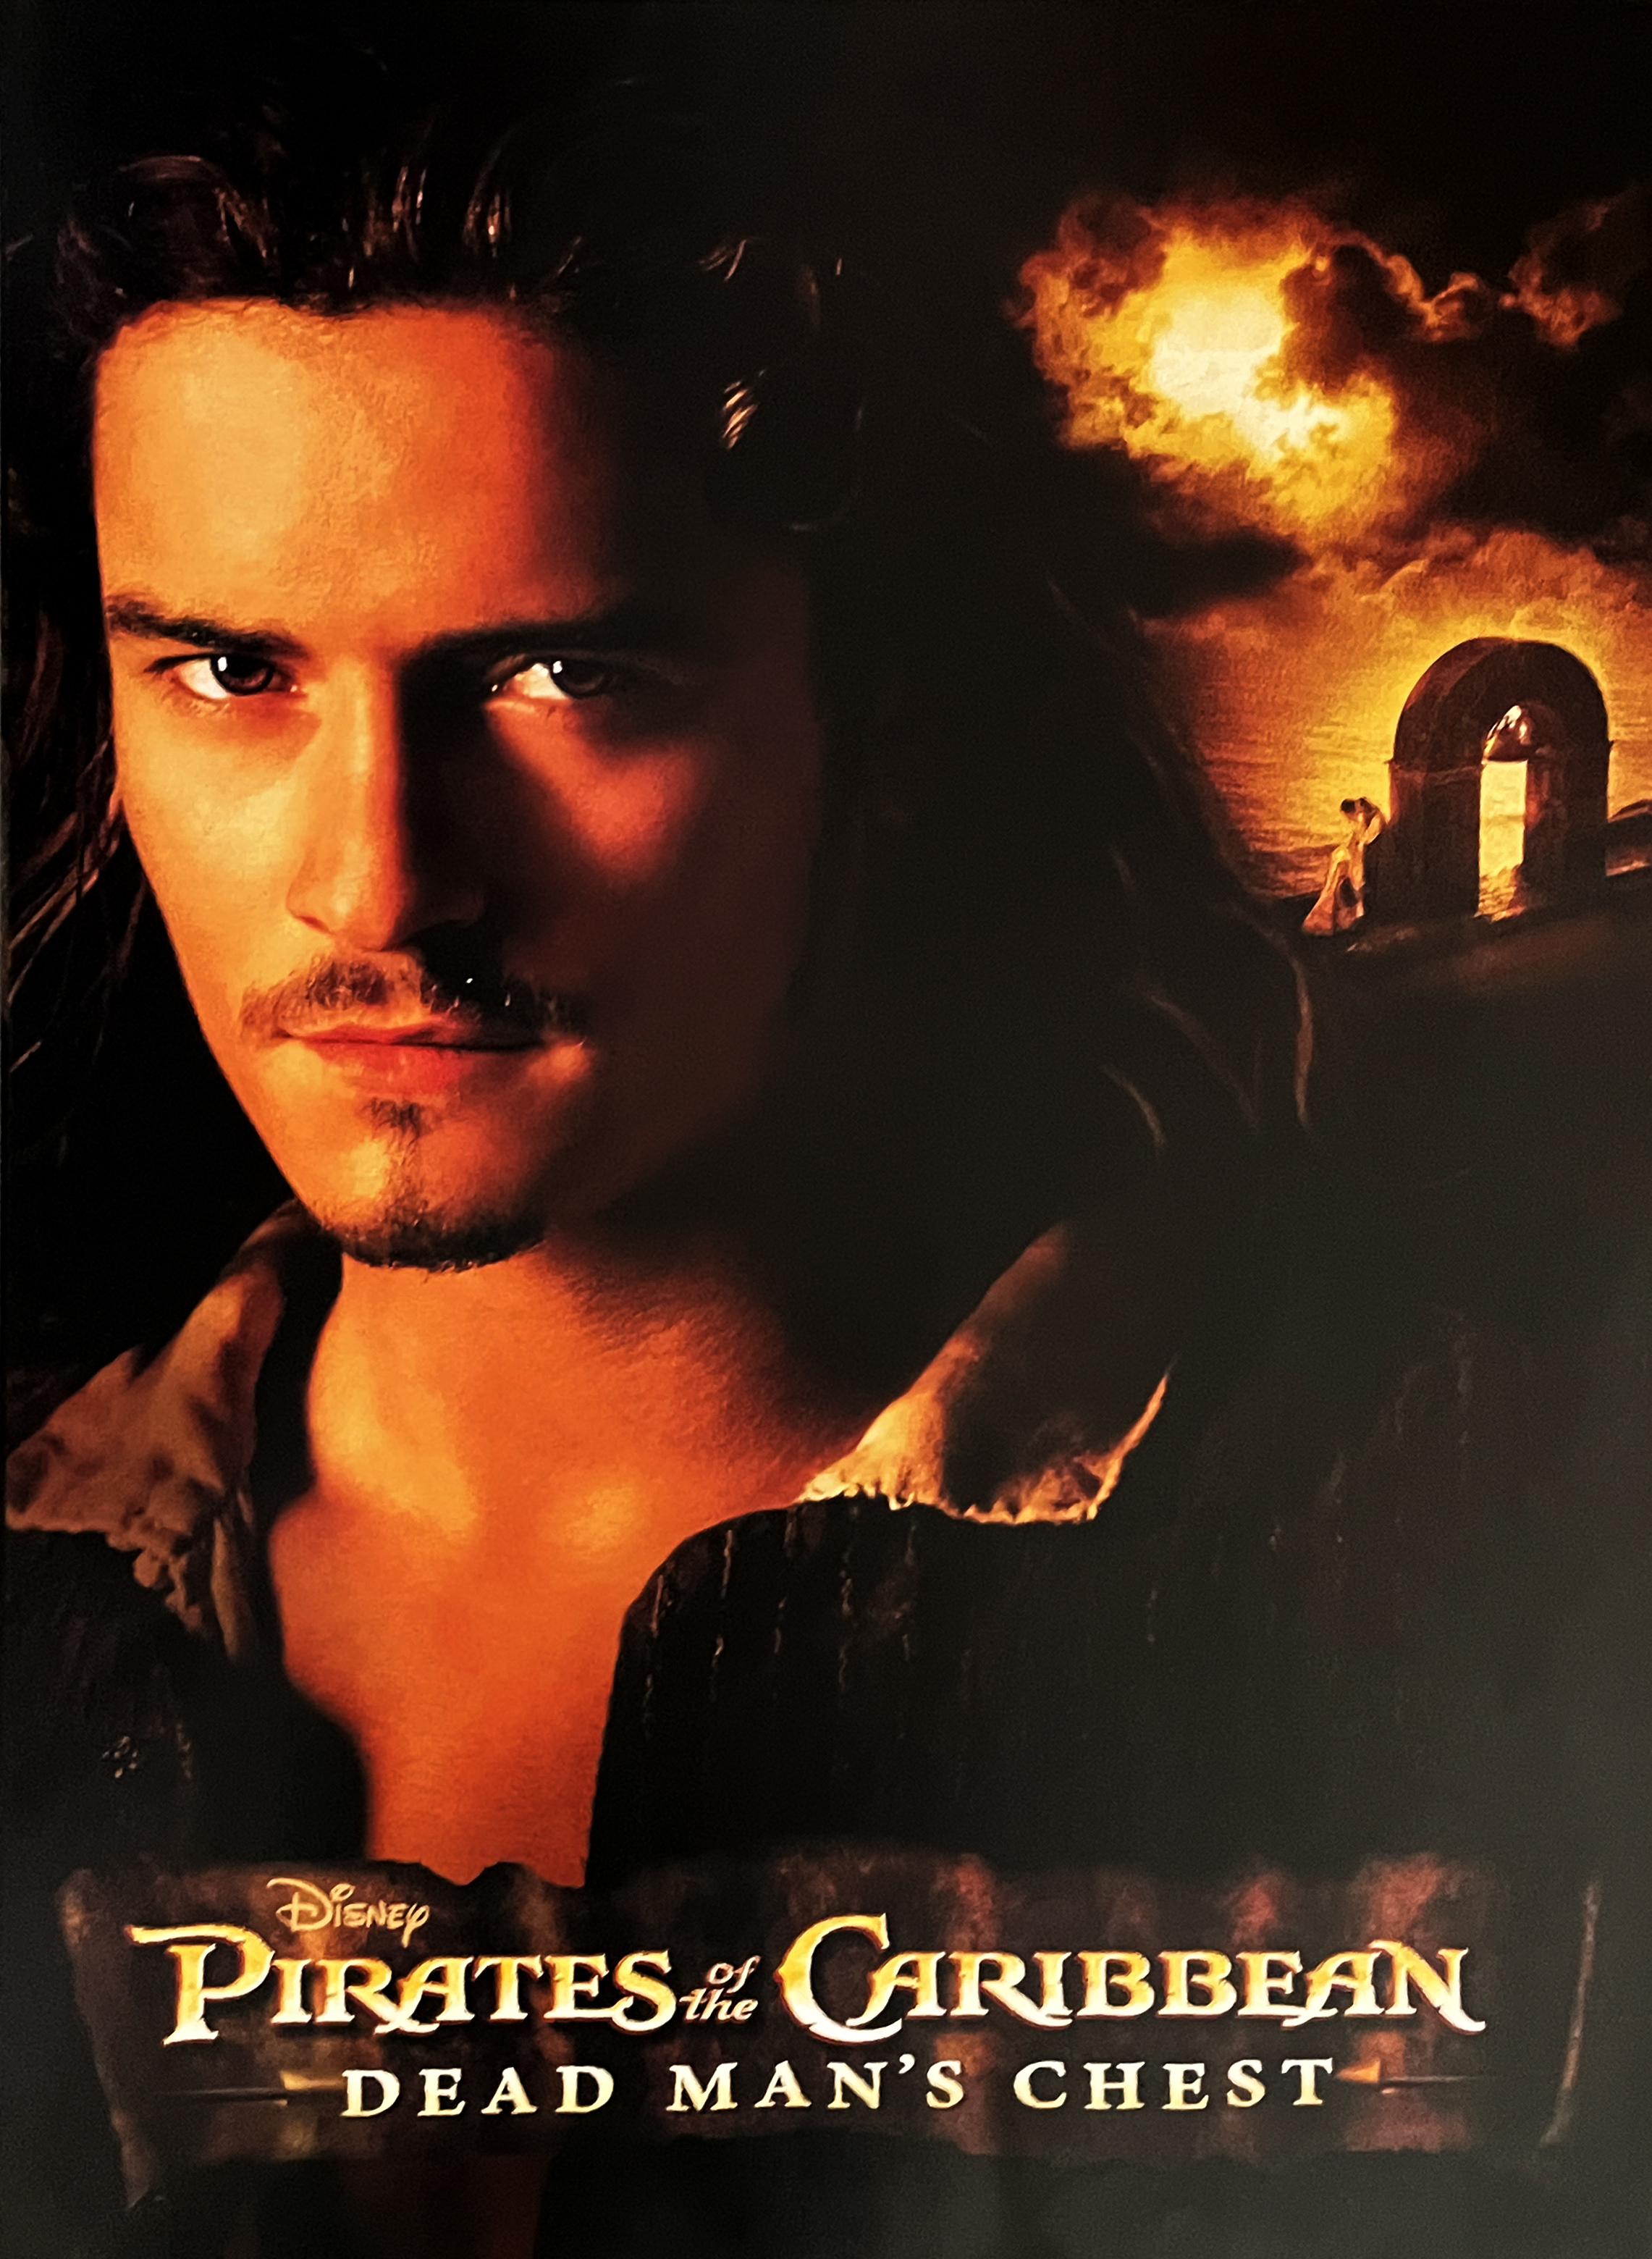 Pirates of the Caribbean - Dead Man's Chest - Orlando Bloom